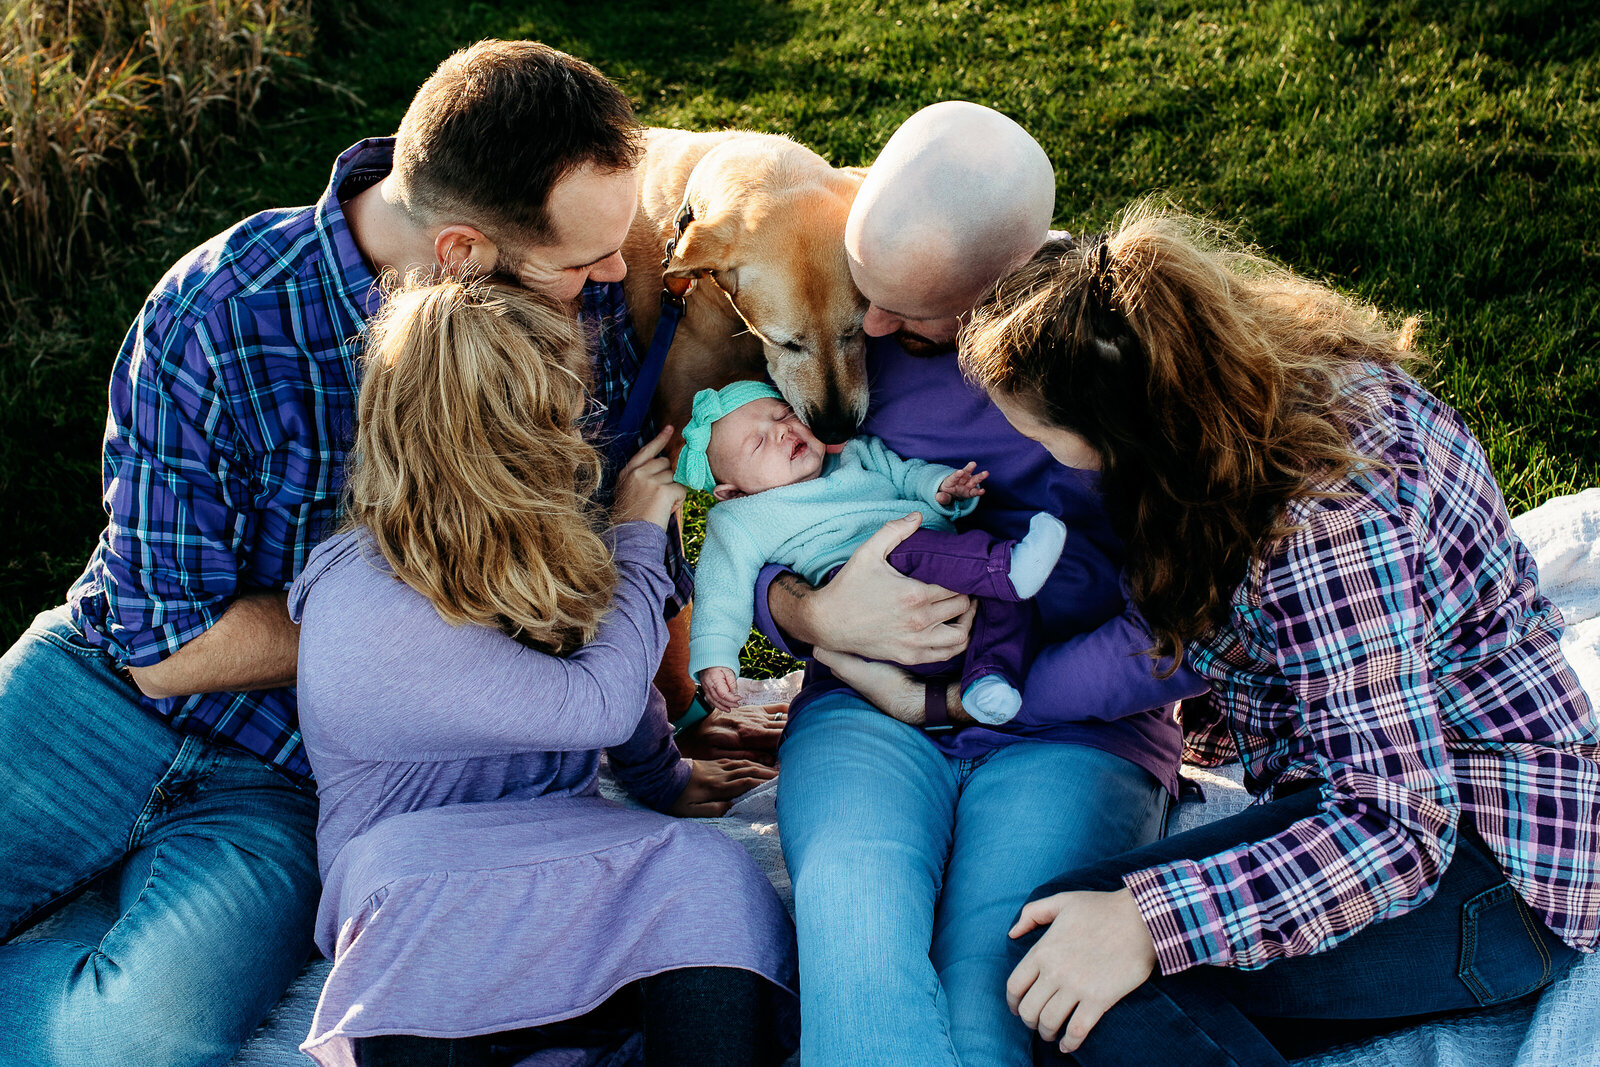 Dads and their two older children snuggling their new baby, their dog peeking over to lick her too.